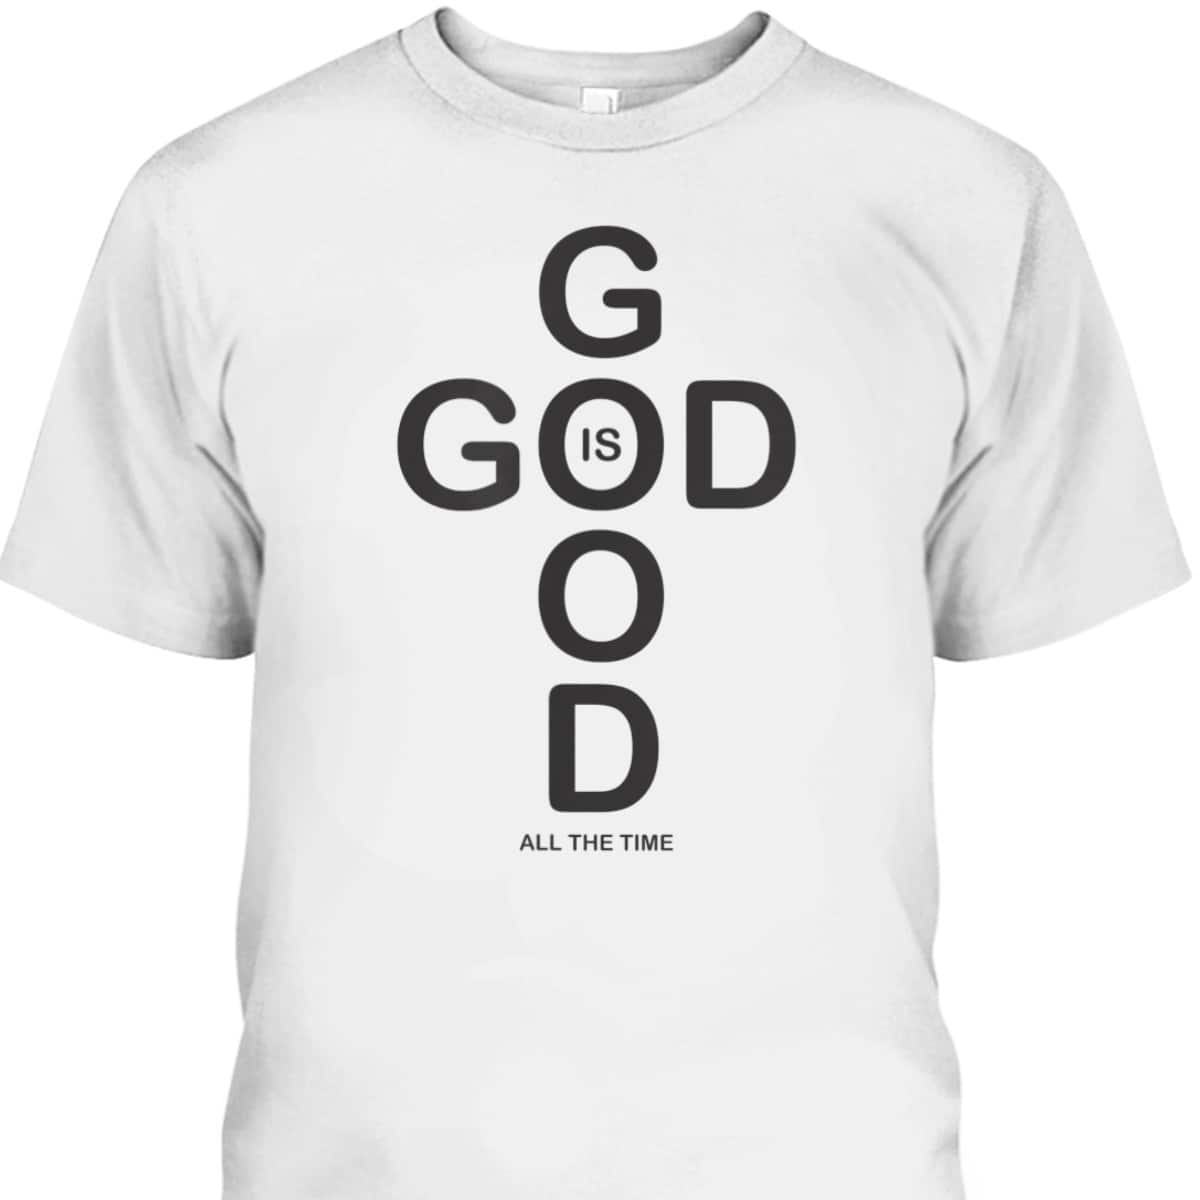 God Is Good T-Shirt All The Time Vintage Gift For Believers